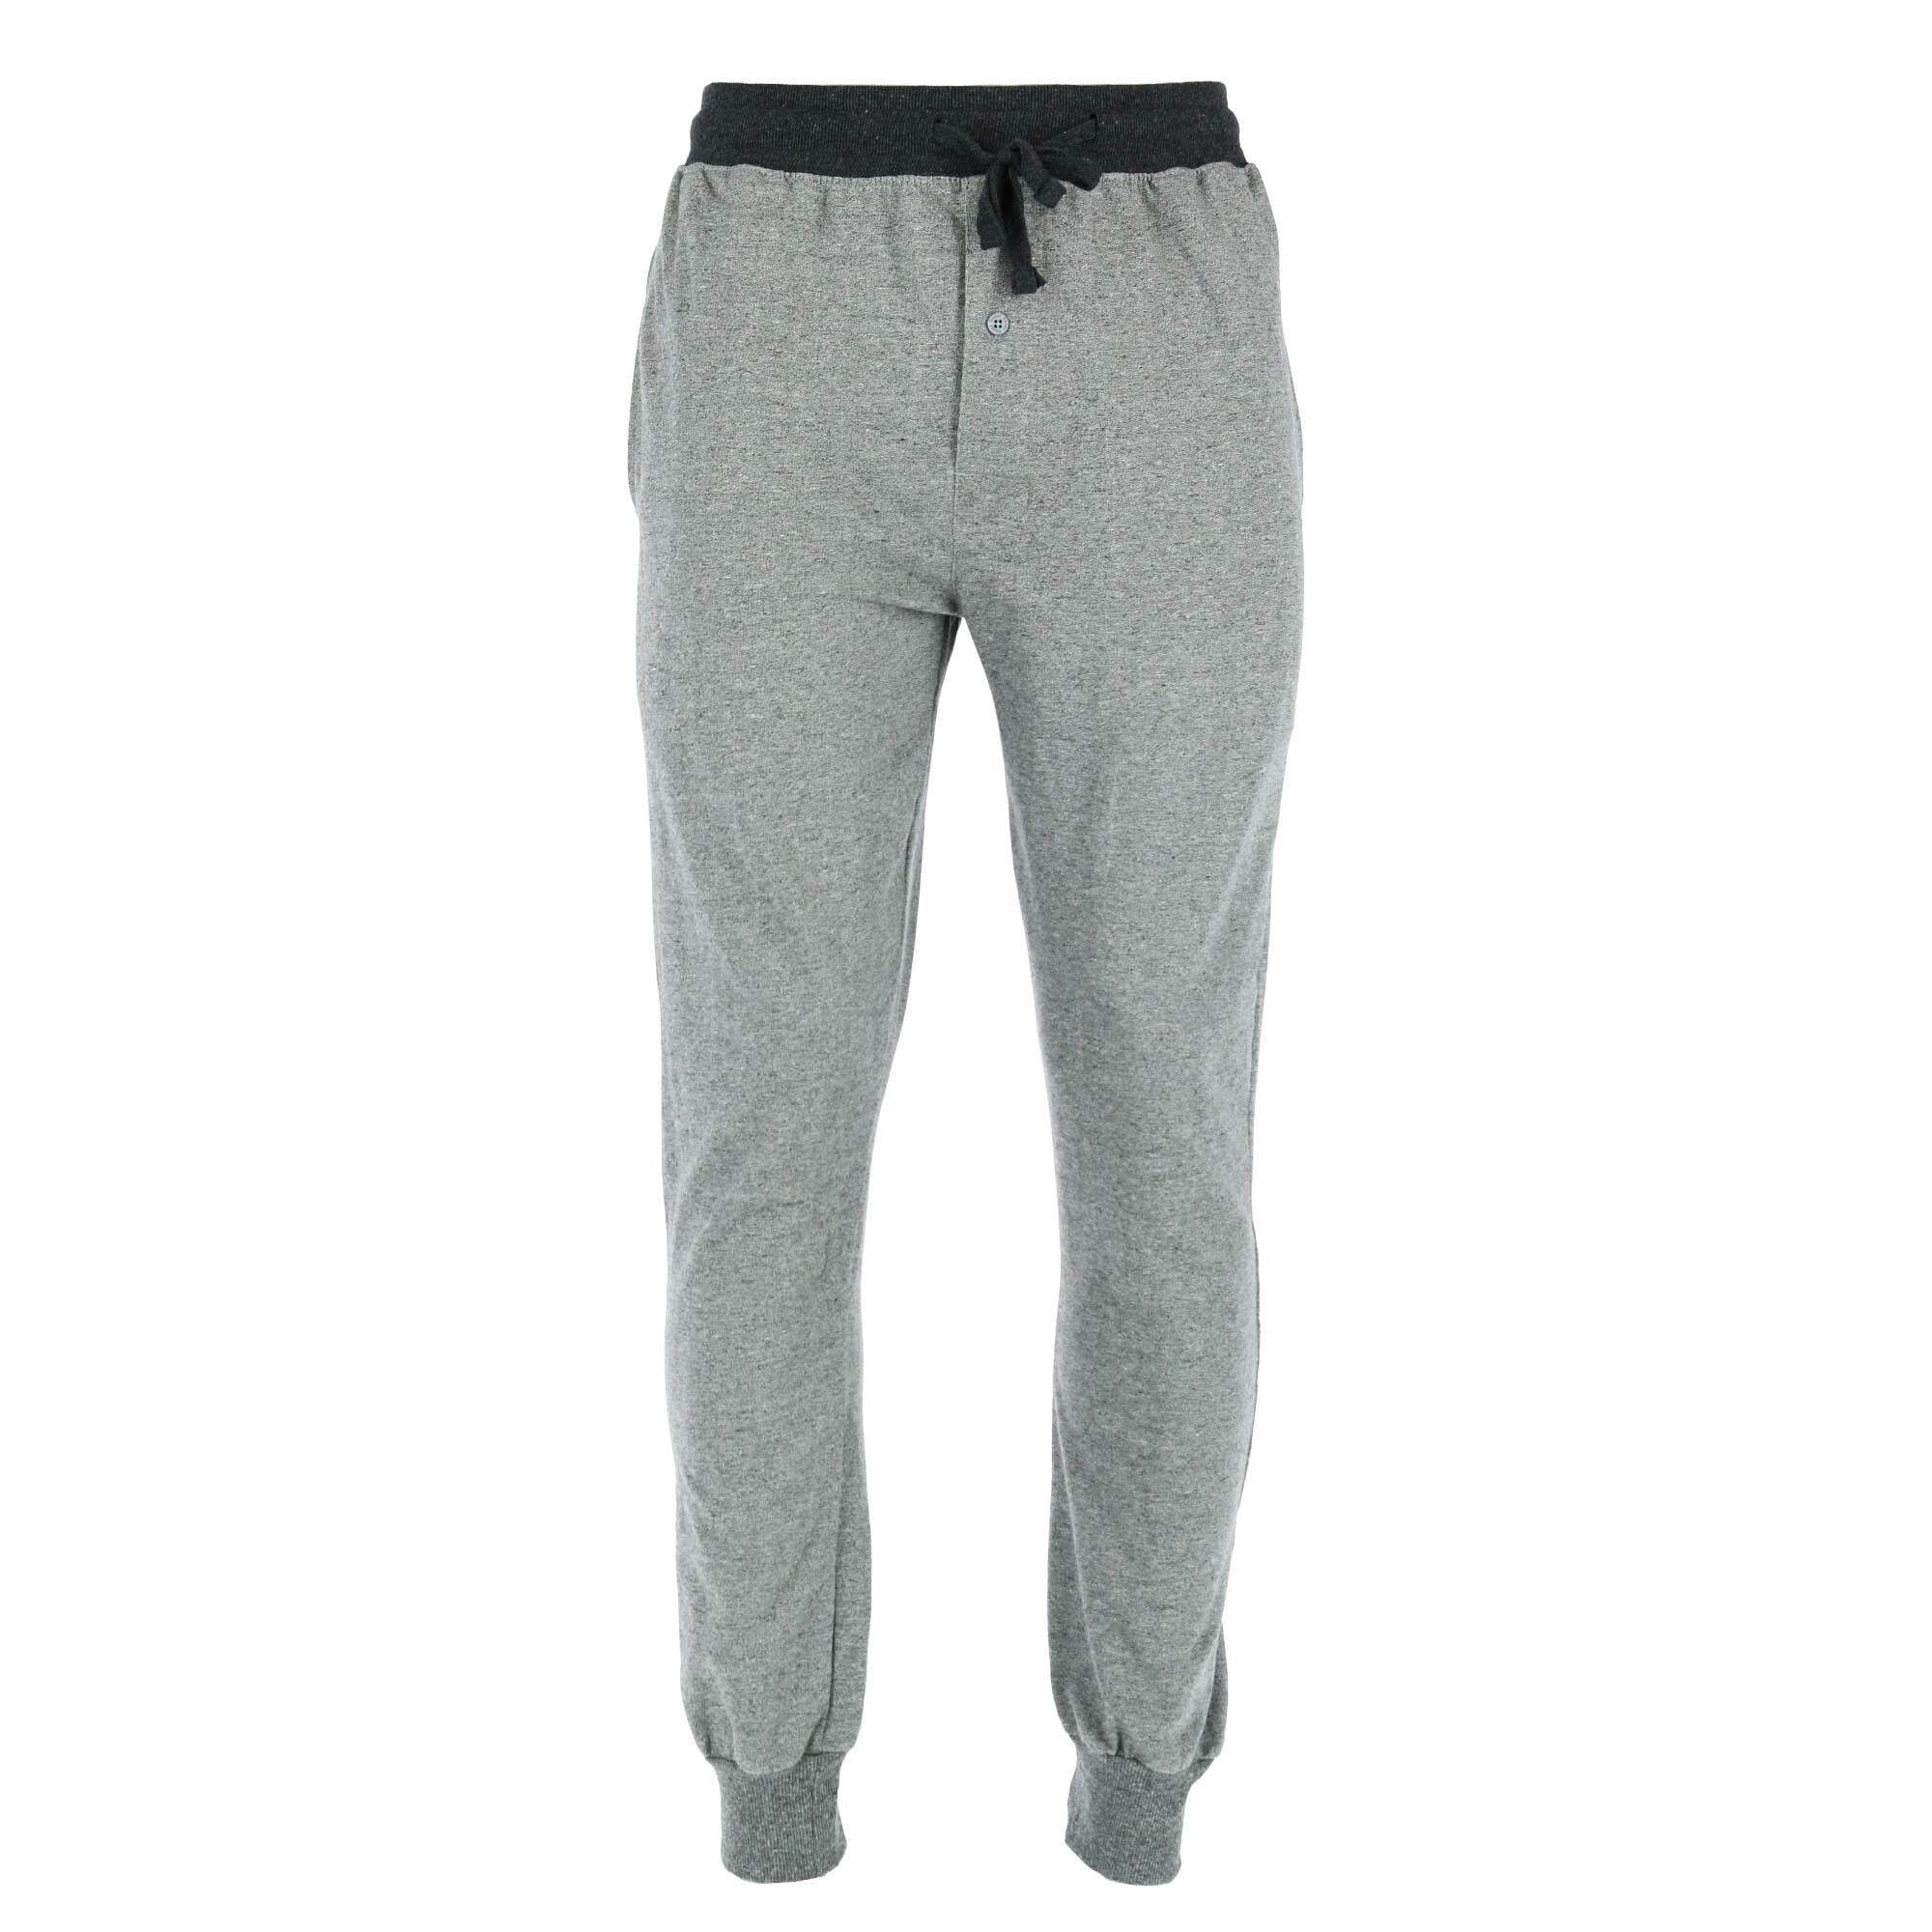 Hanes Men's French Terry Jogger Pant | Walmart Canada